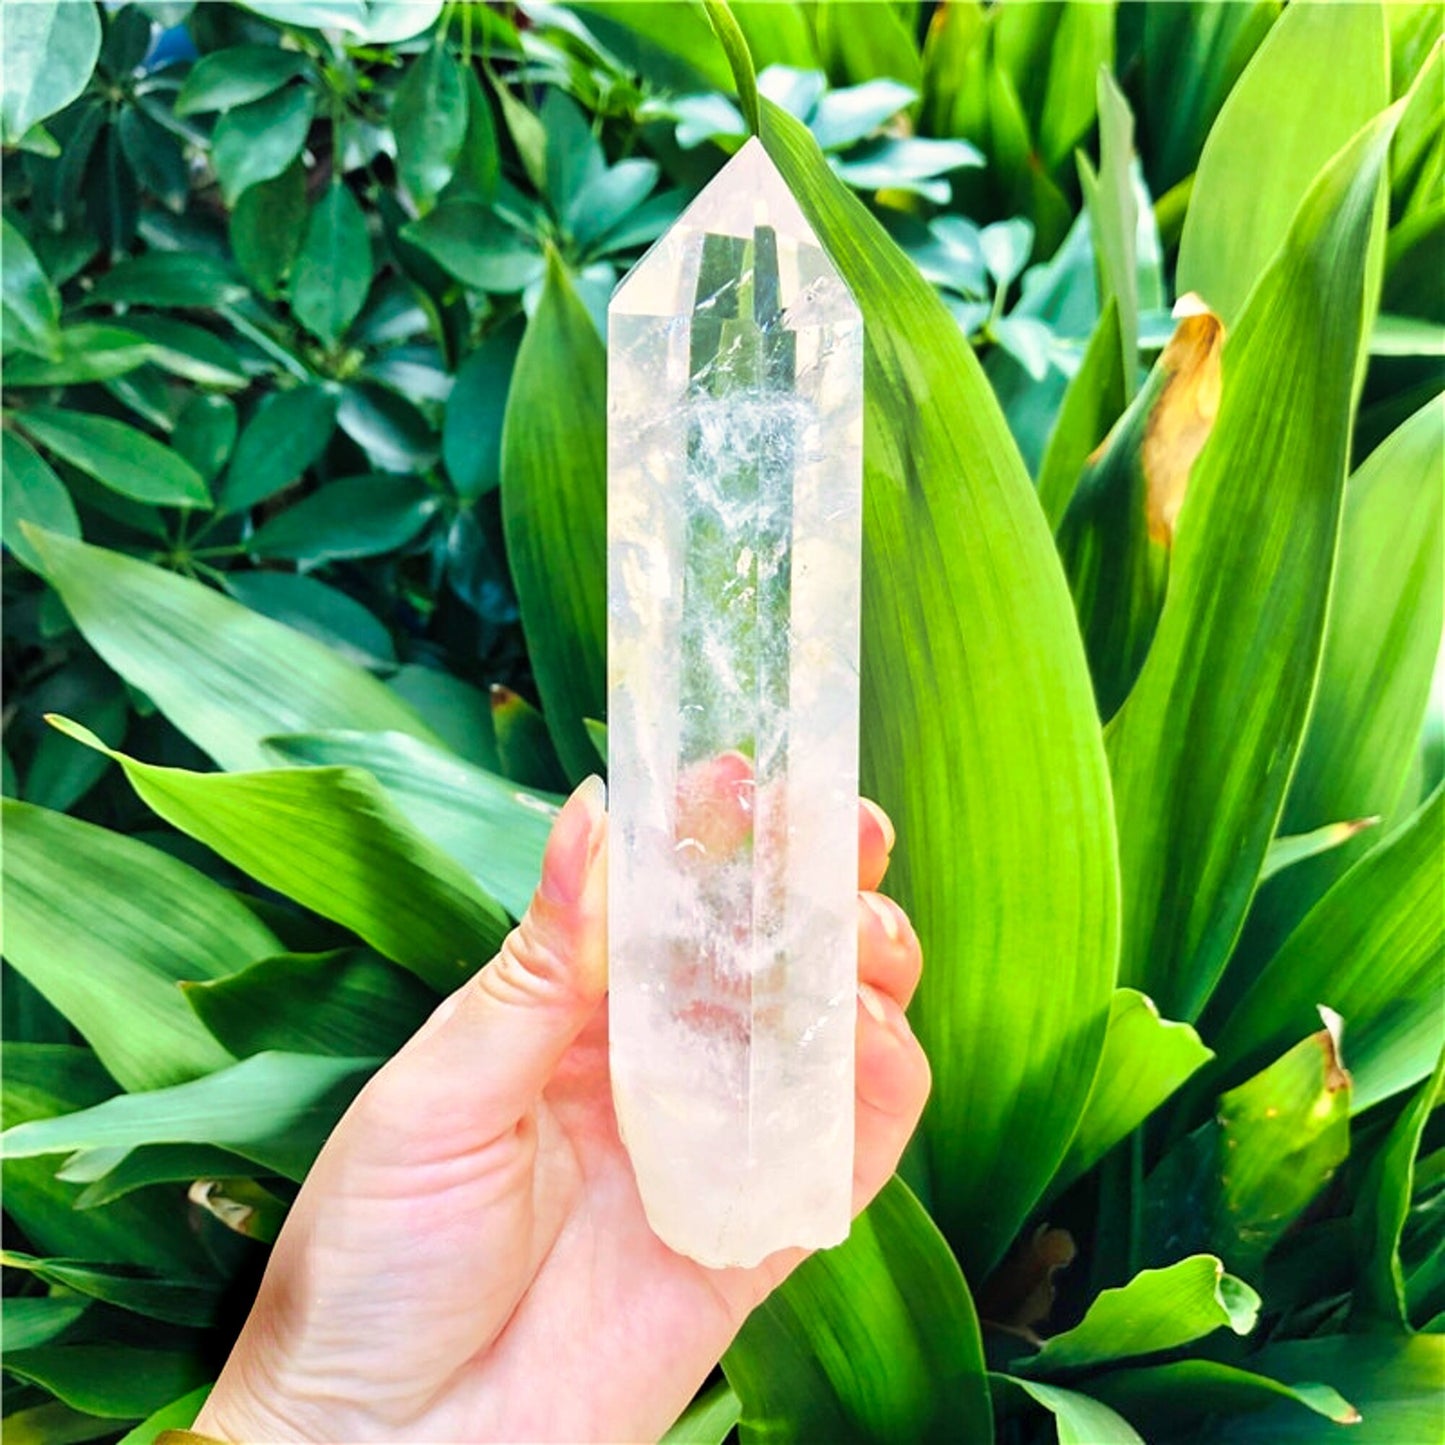 Large Clear Lemurian Seed Quartz Natural Point Cluster Crystal Rough Healing 350-400g